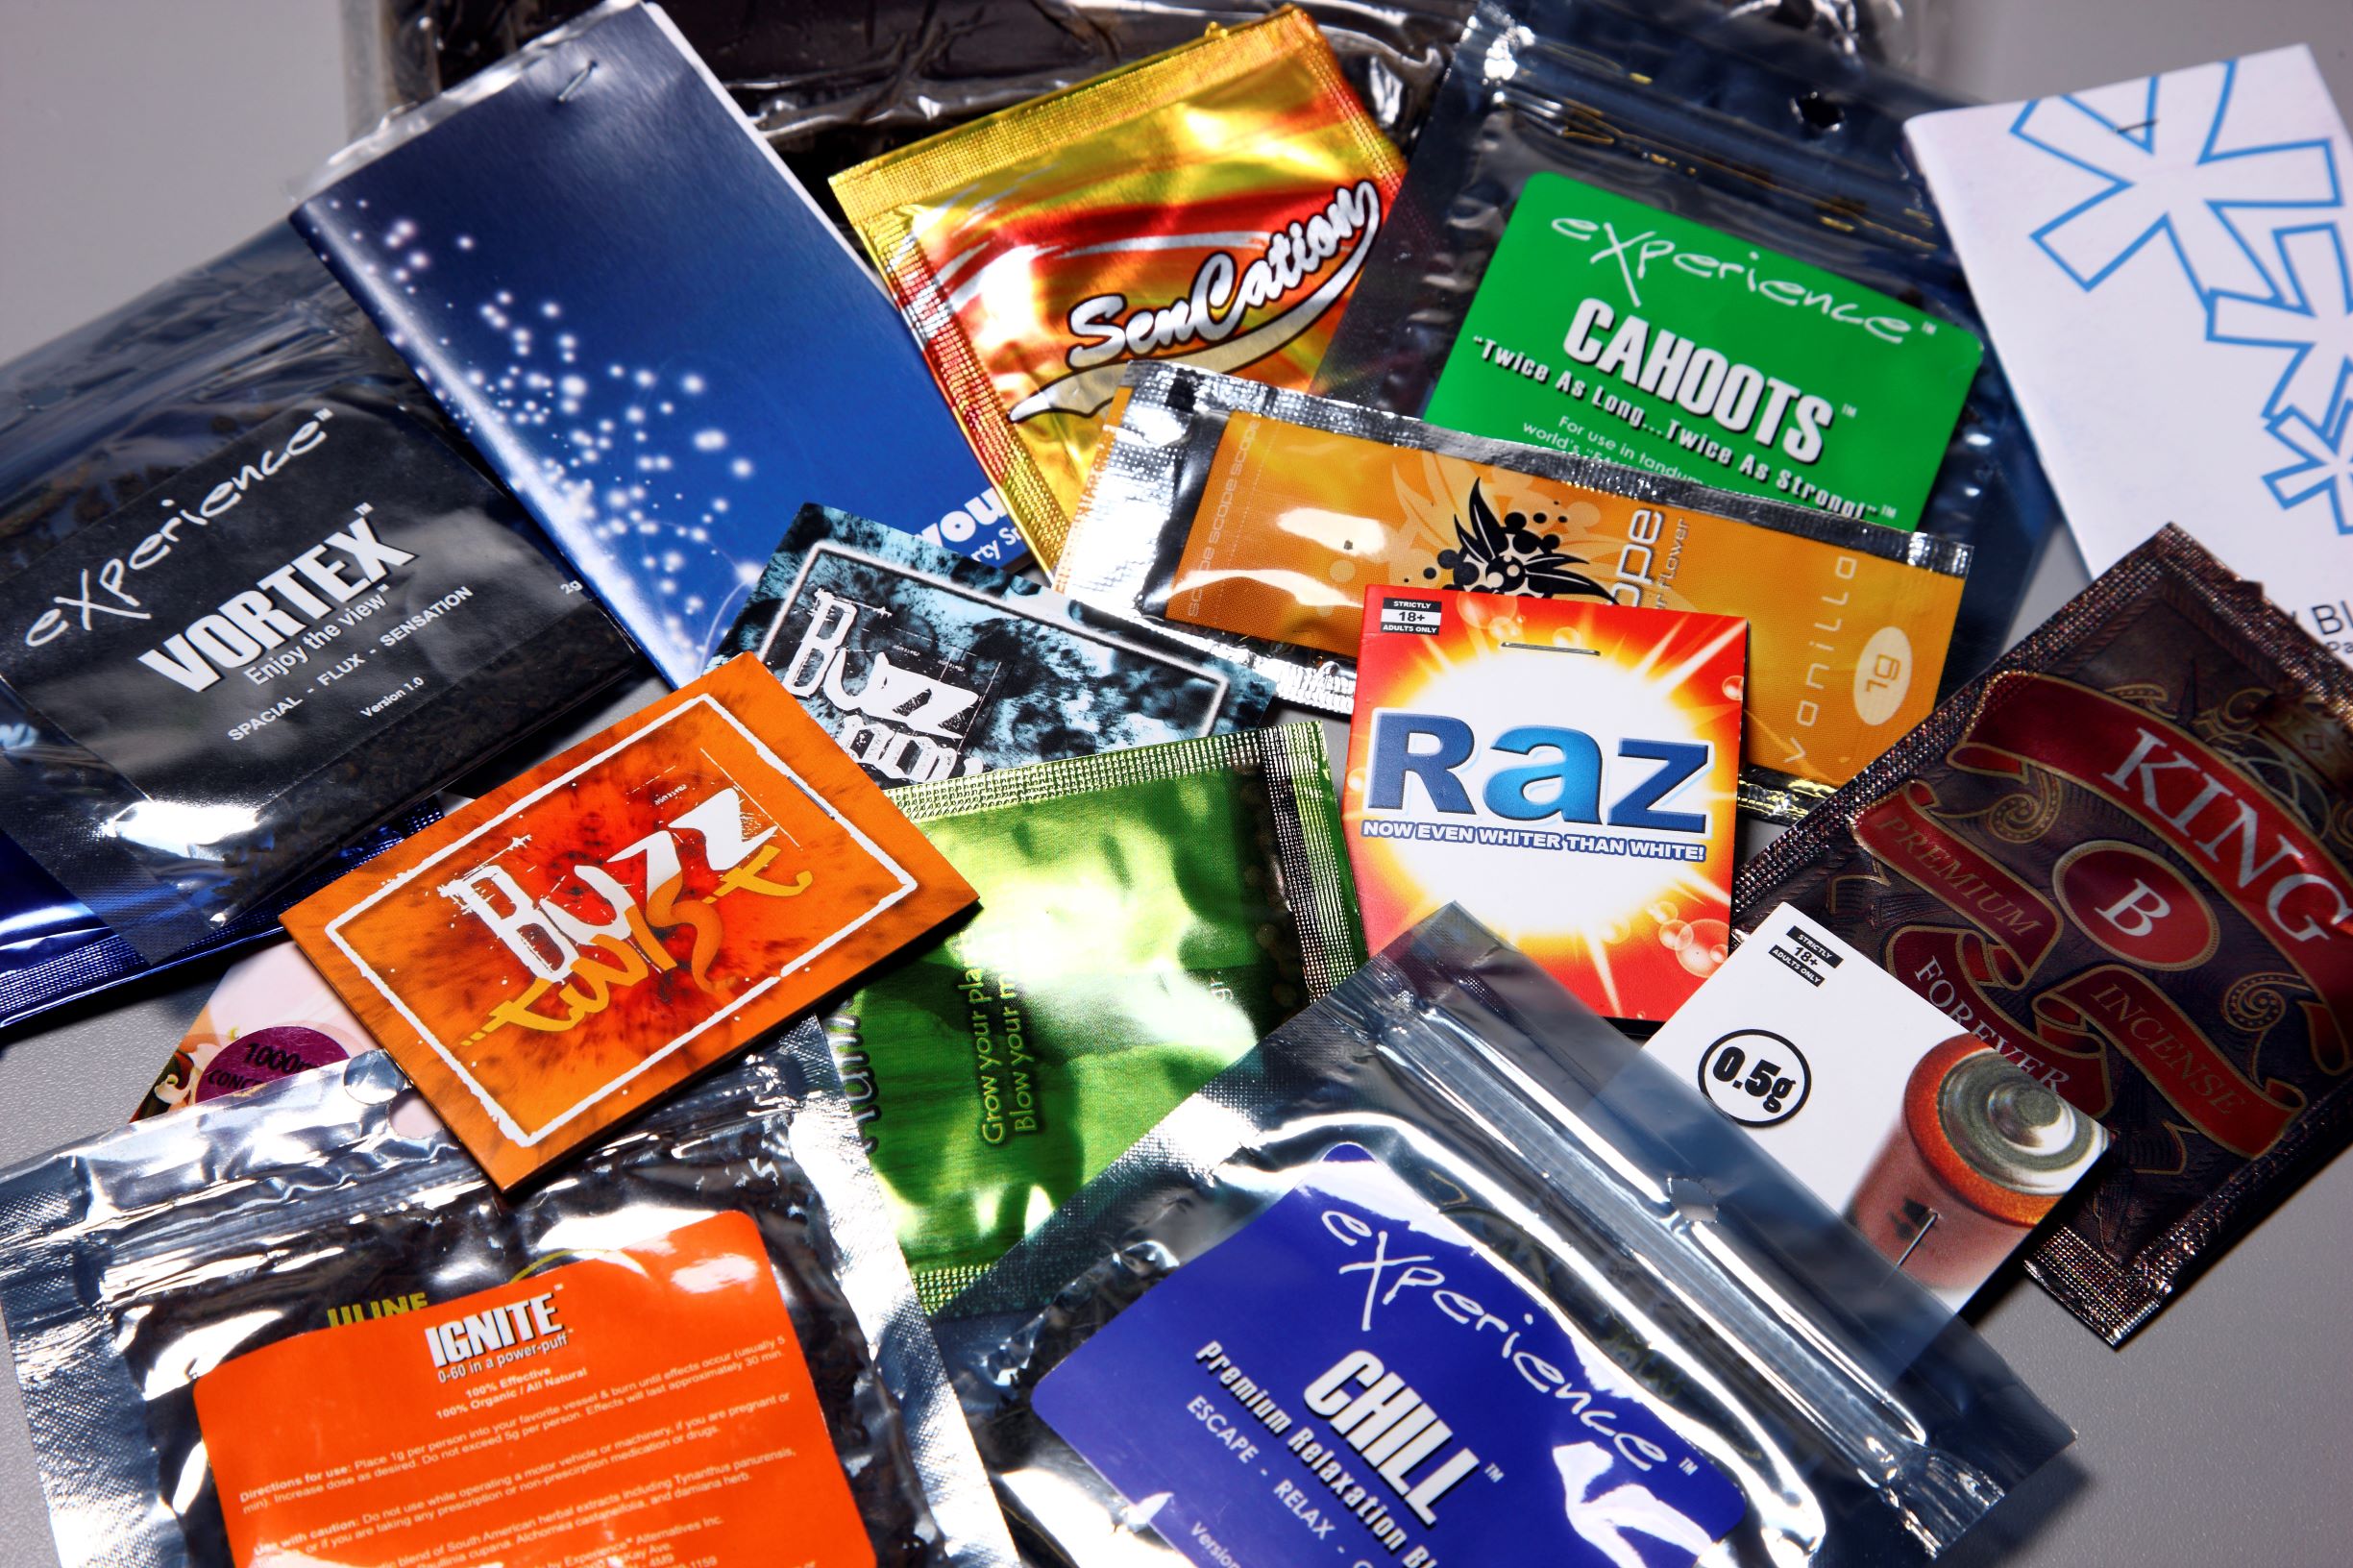 Drug sachets from the online trade